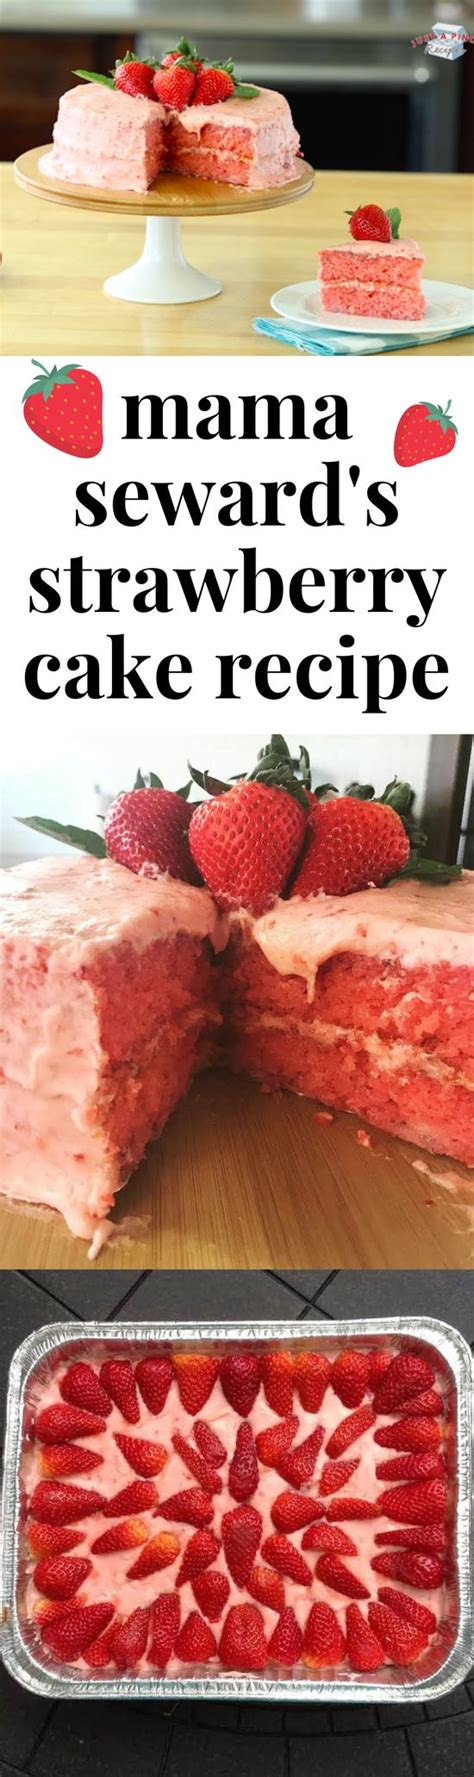 Just A Pinch Recipes Justapinchcooks Profile Pinterest